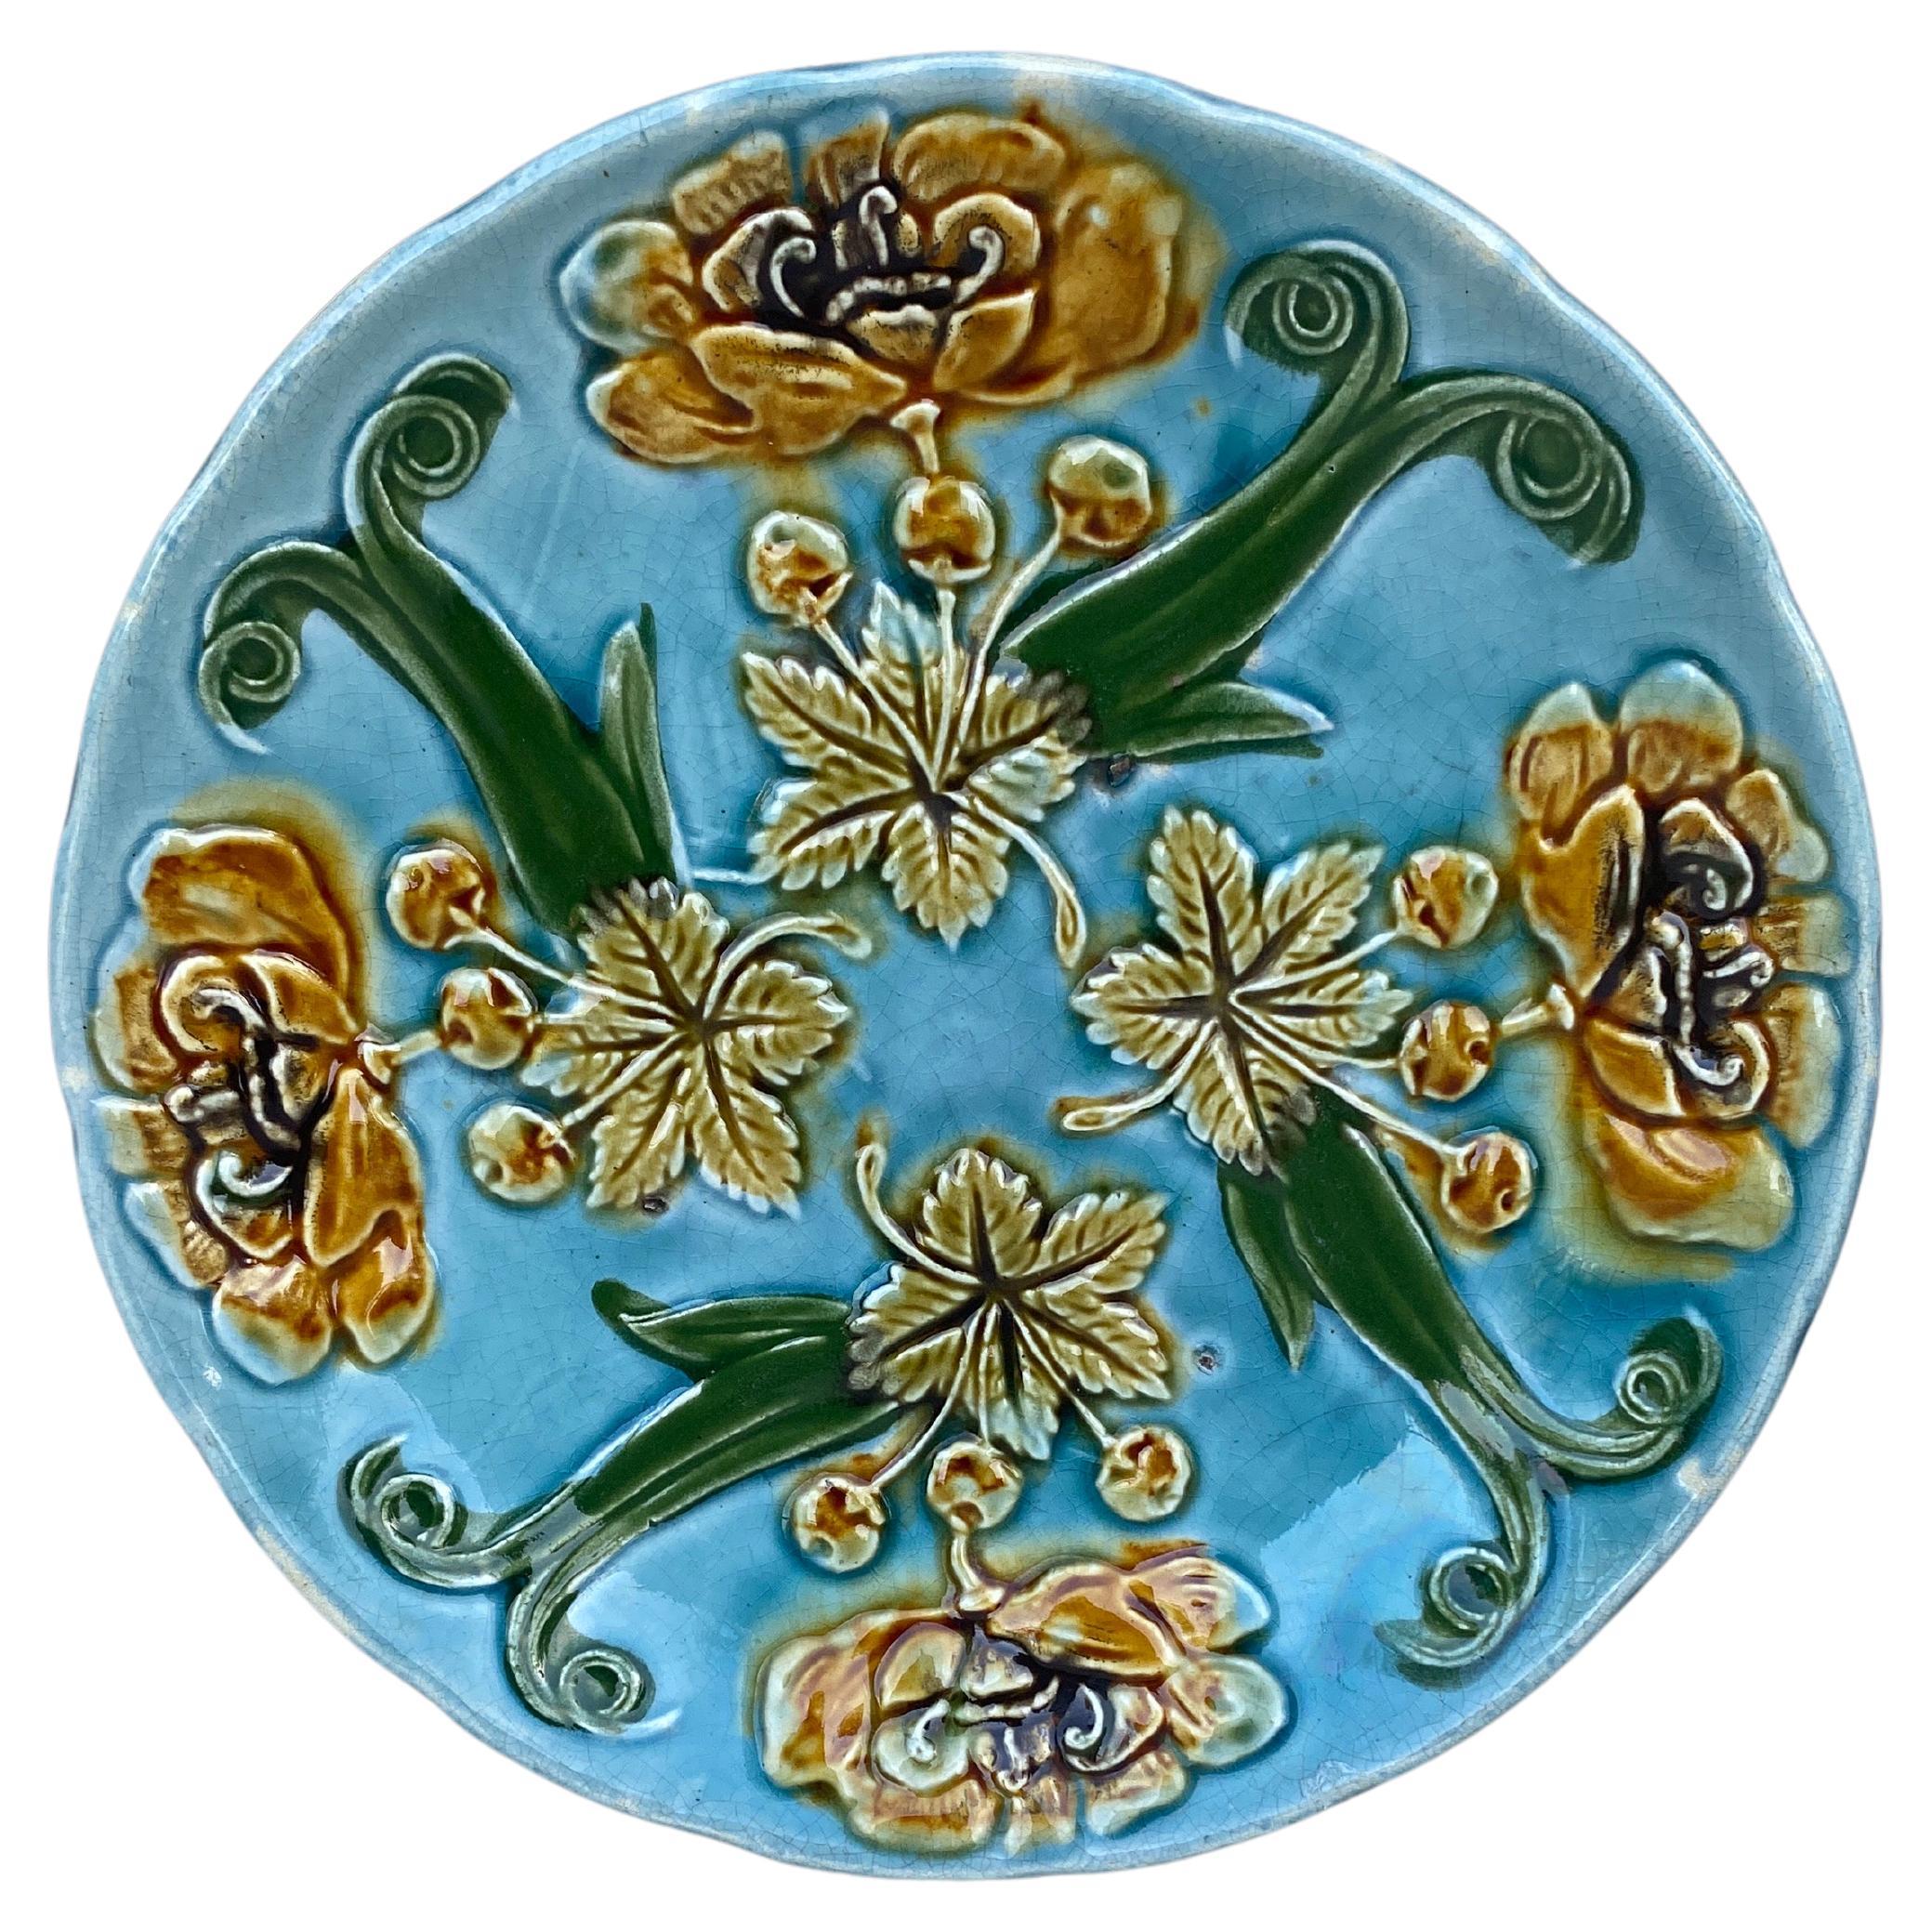 French Blue Majolica Plate with Yellow Flowers Circa 1890